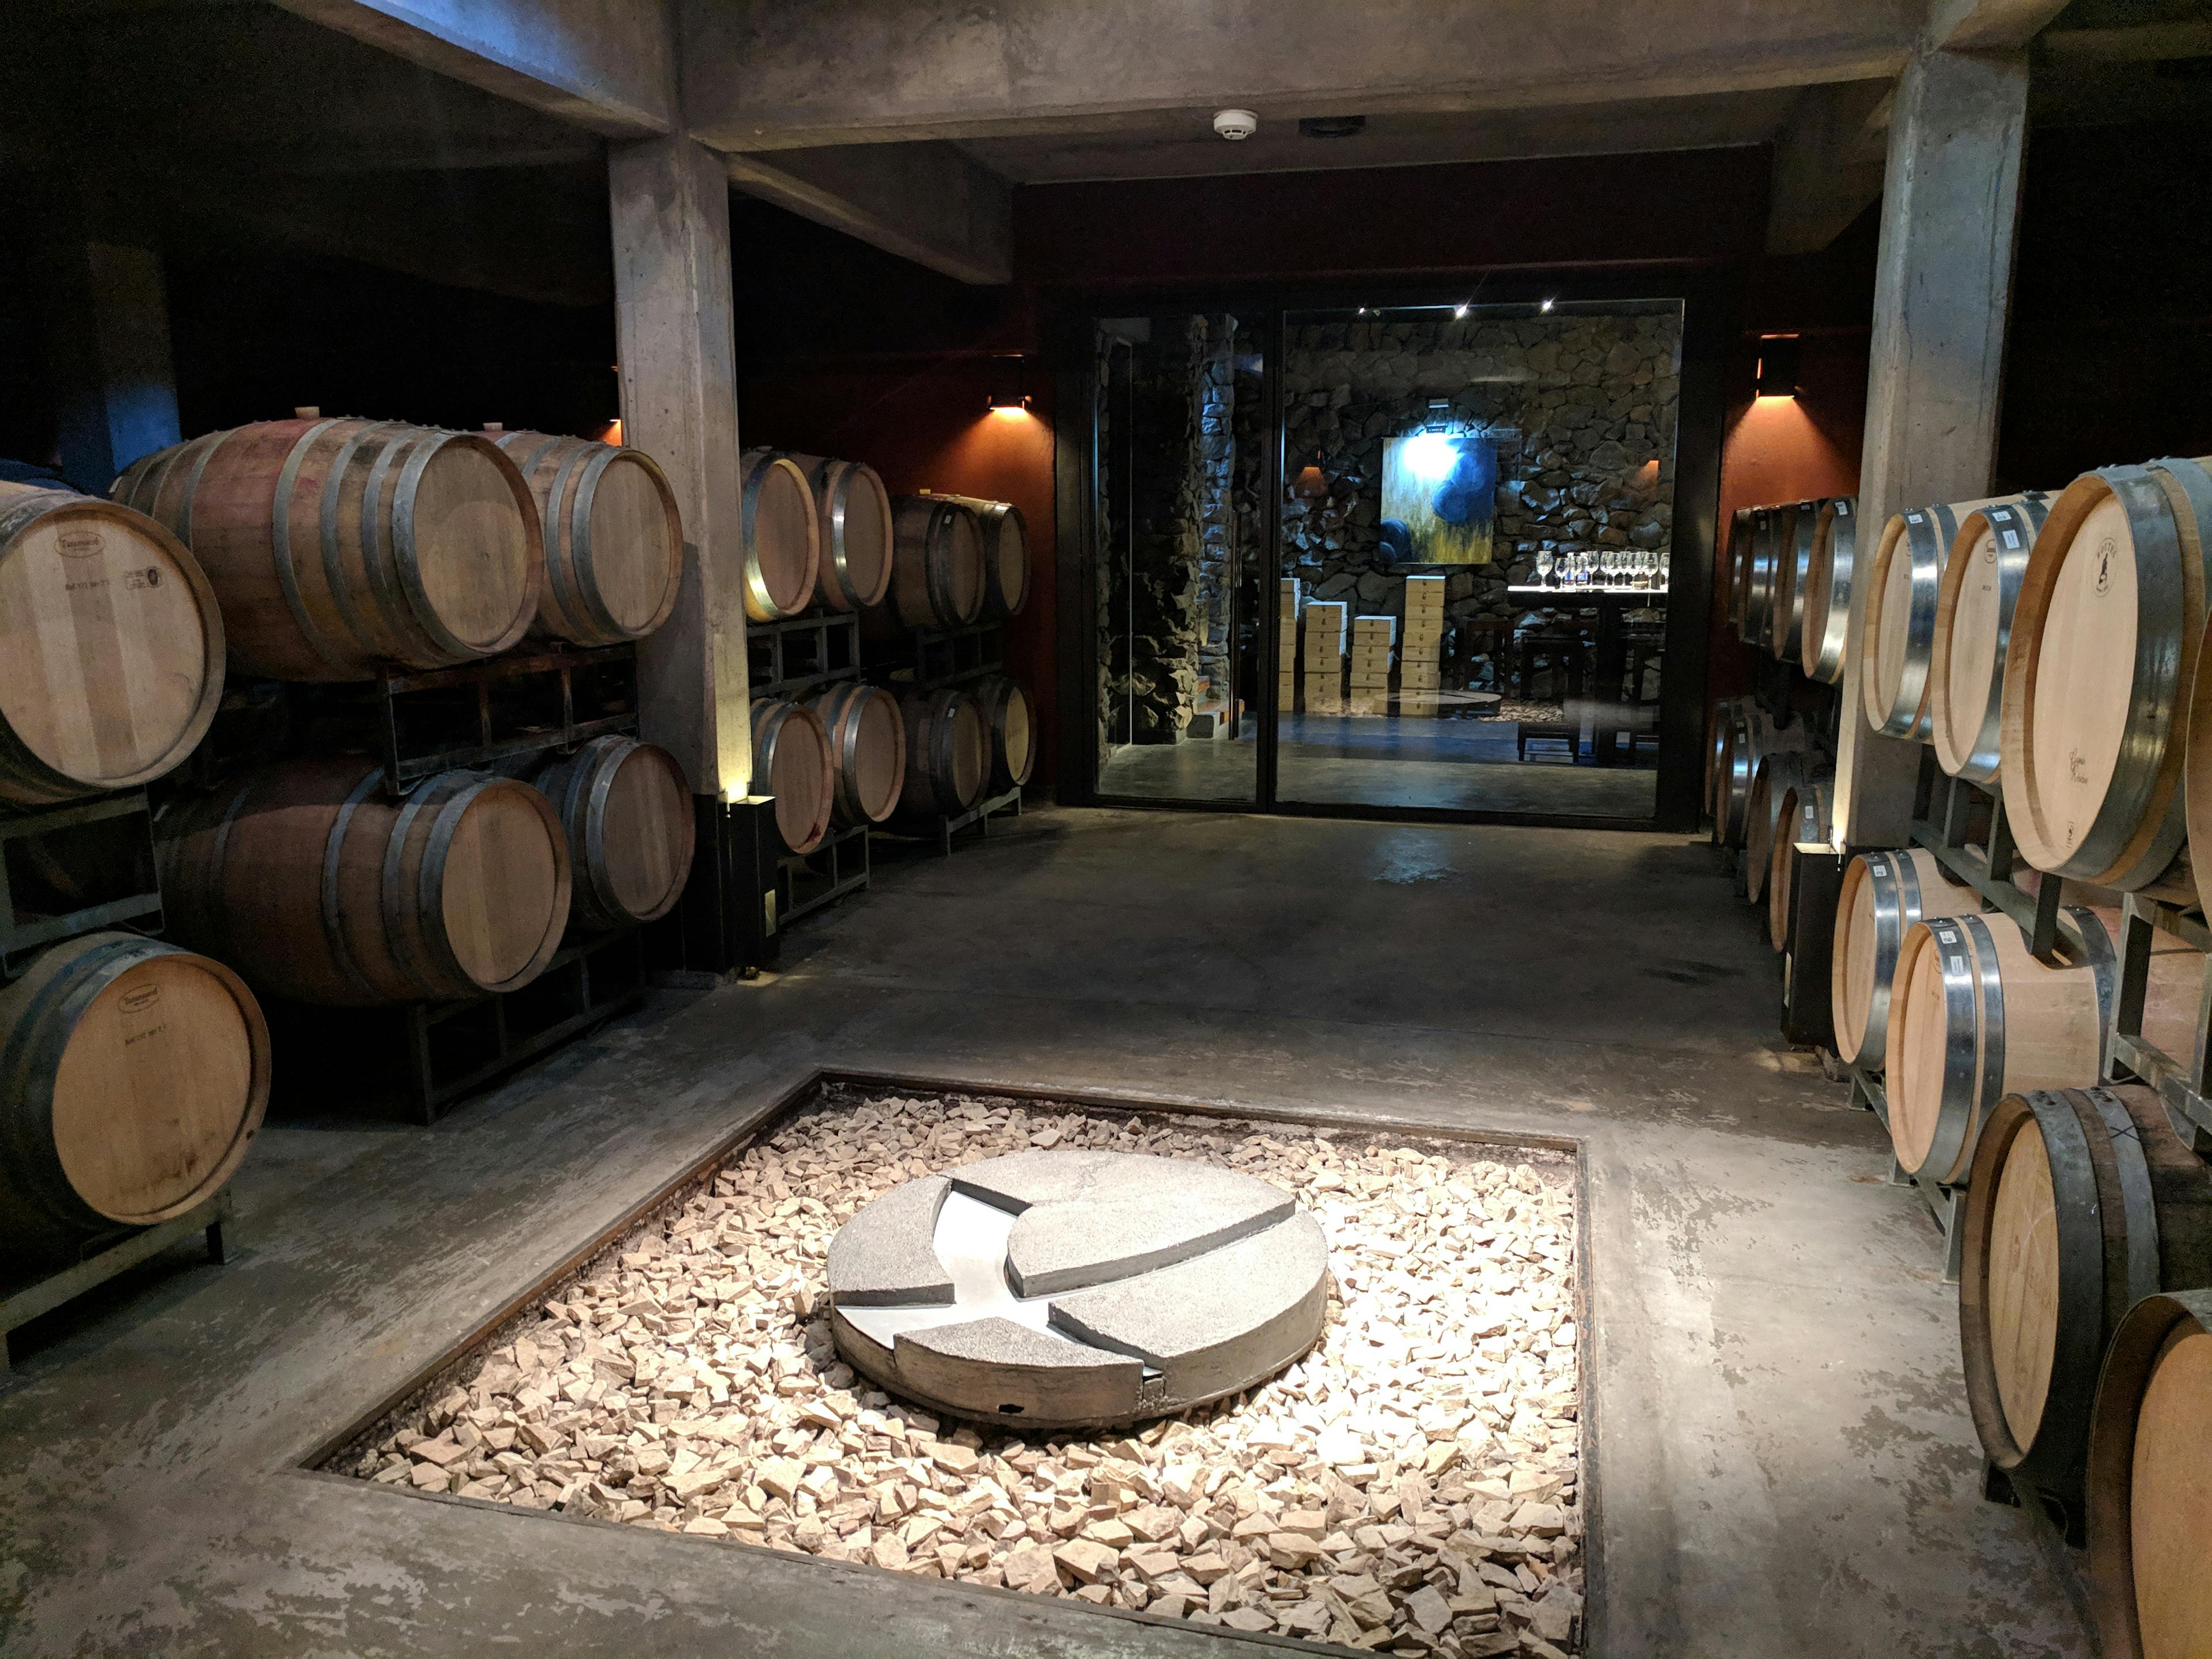 The wine cellar at Melipal